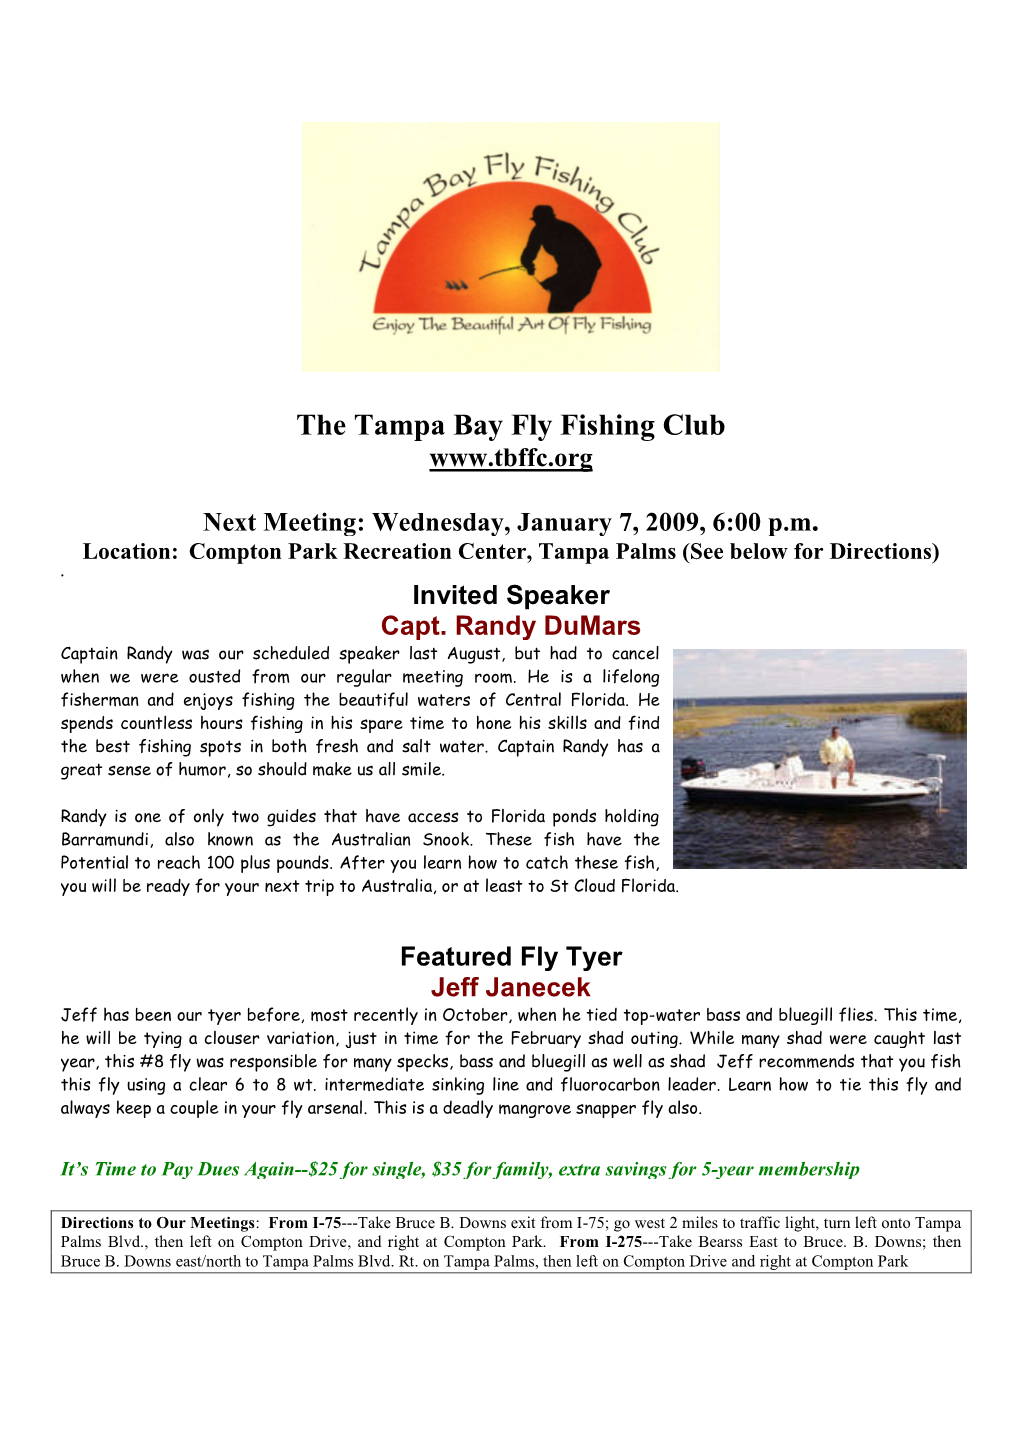 The Tampa Bay Fly Fishing Club Next Meeting